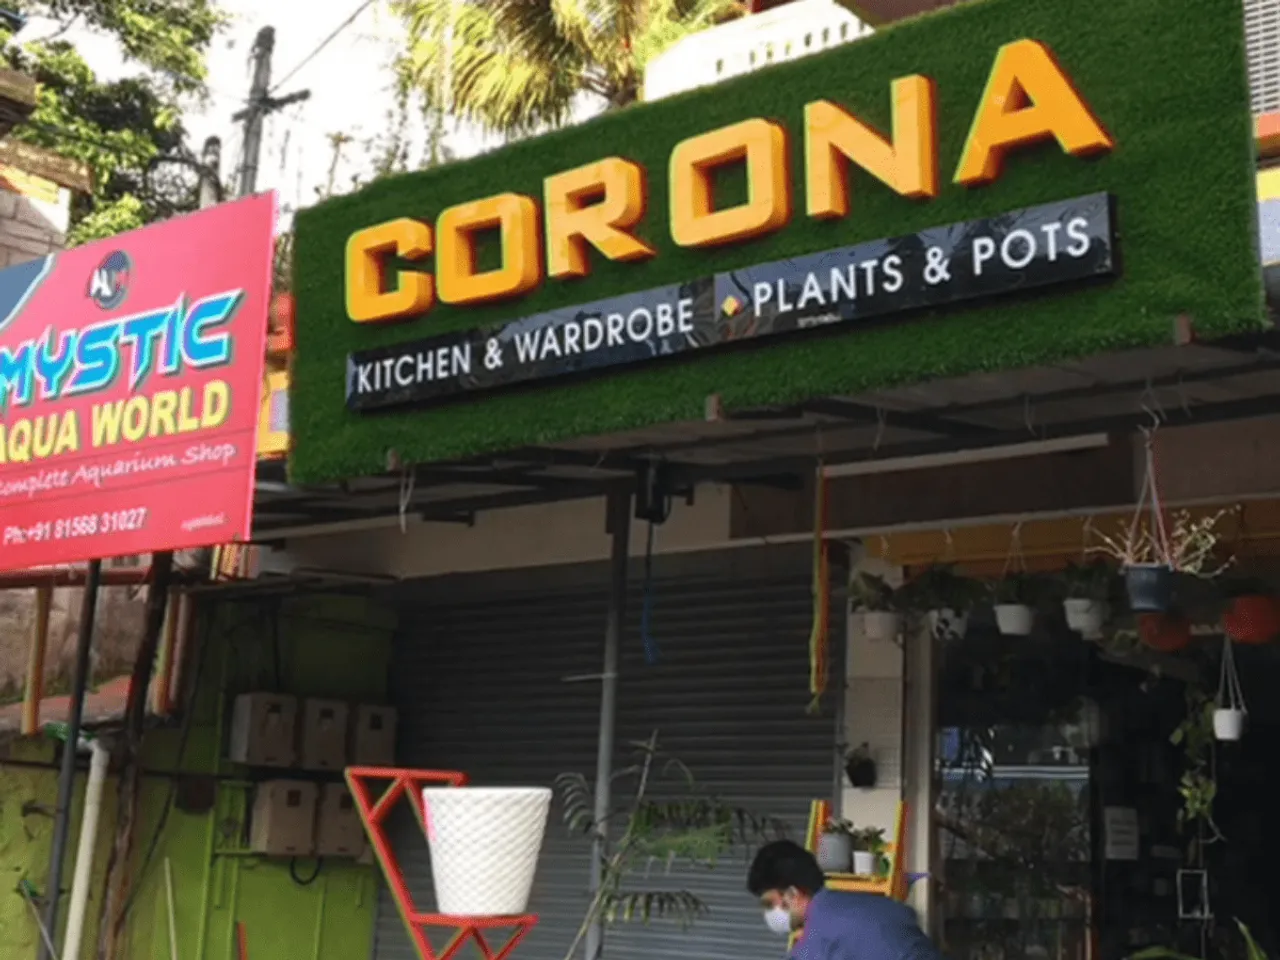 This shop in Kerala Named 'Corona' and it's attracting customers